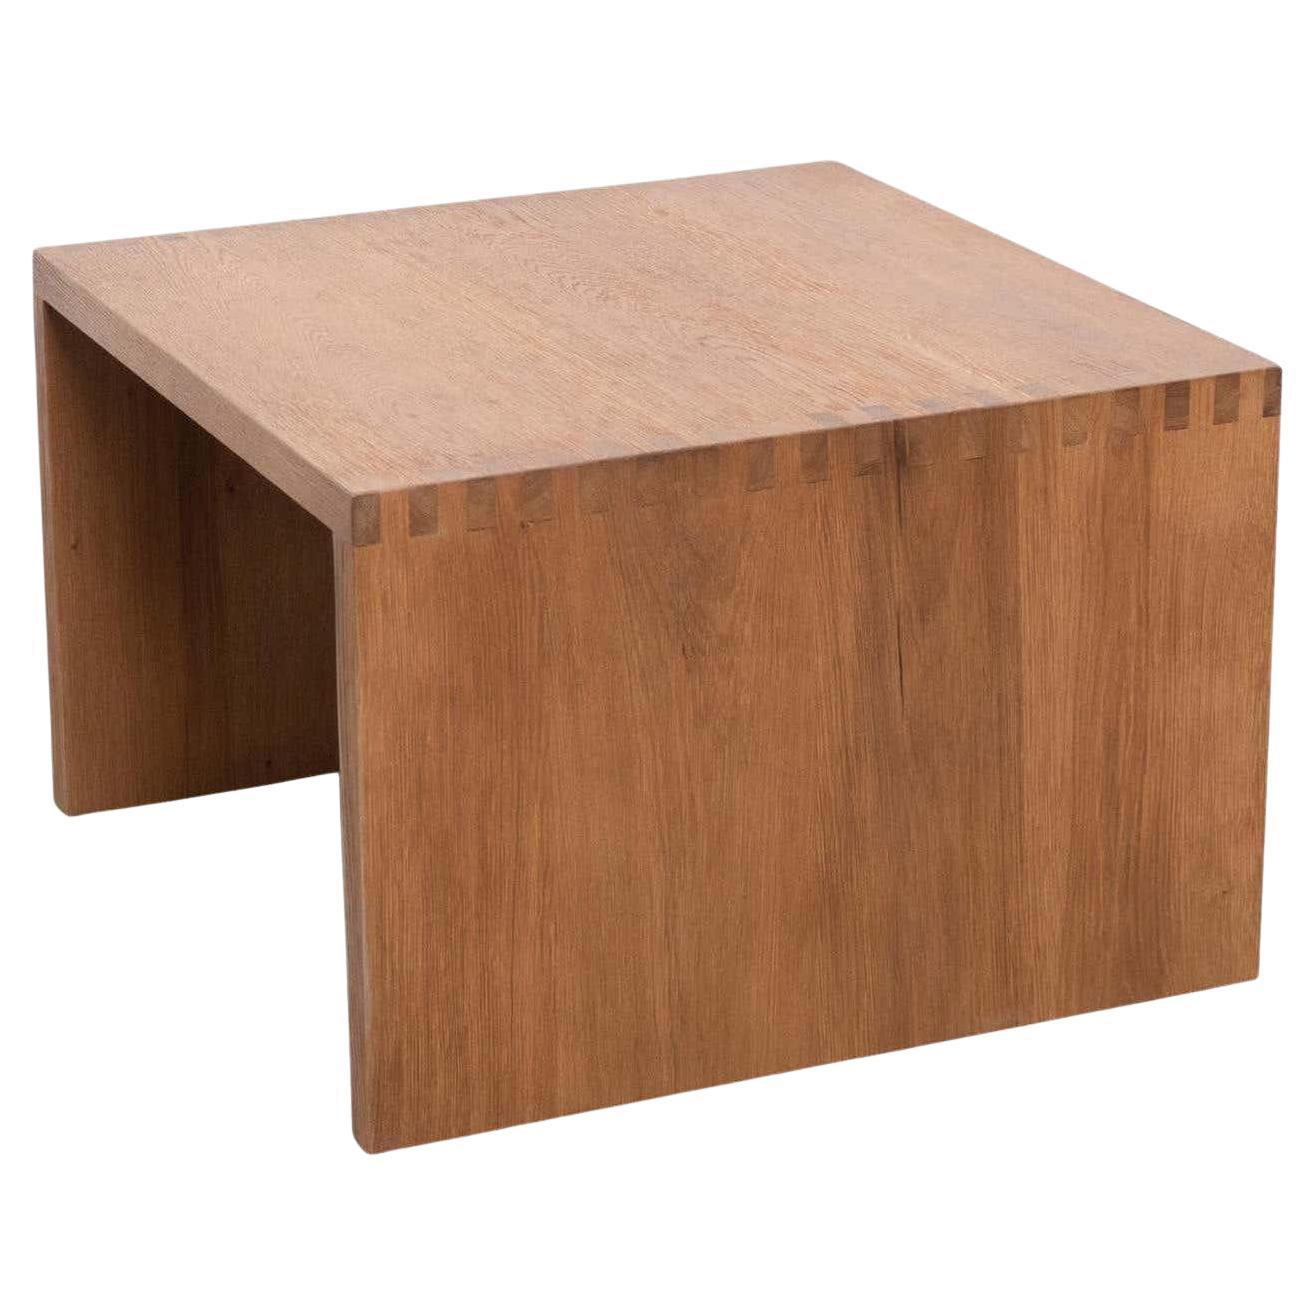 Dada Est. Contemporary Solid Oak Low Table For Sale